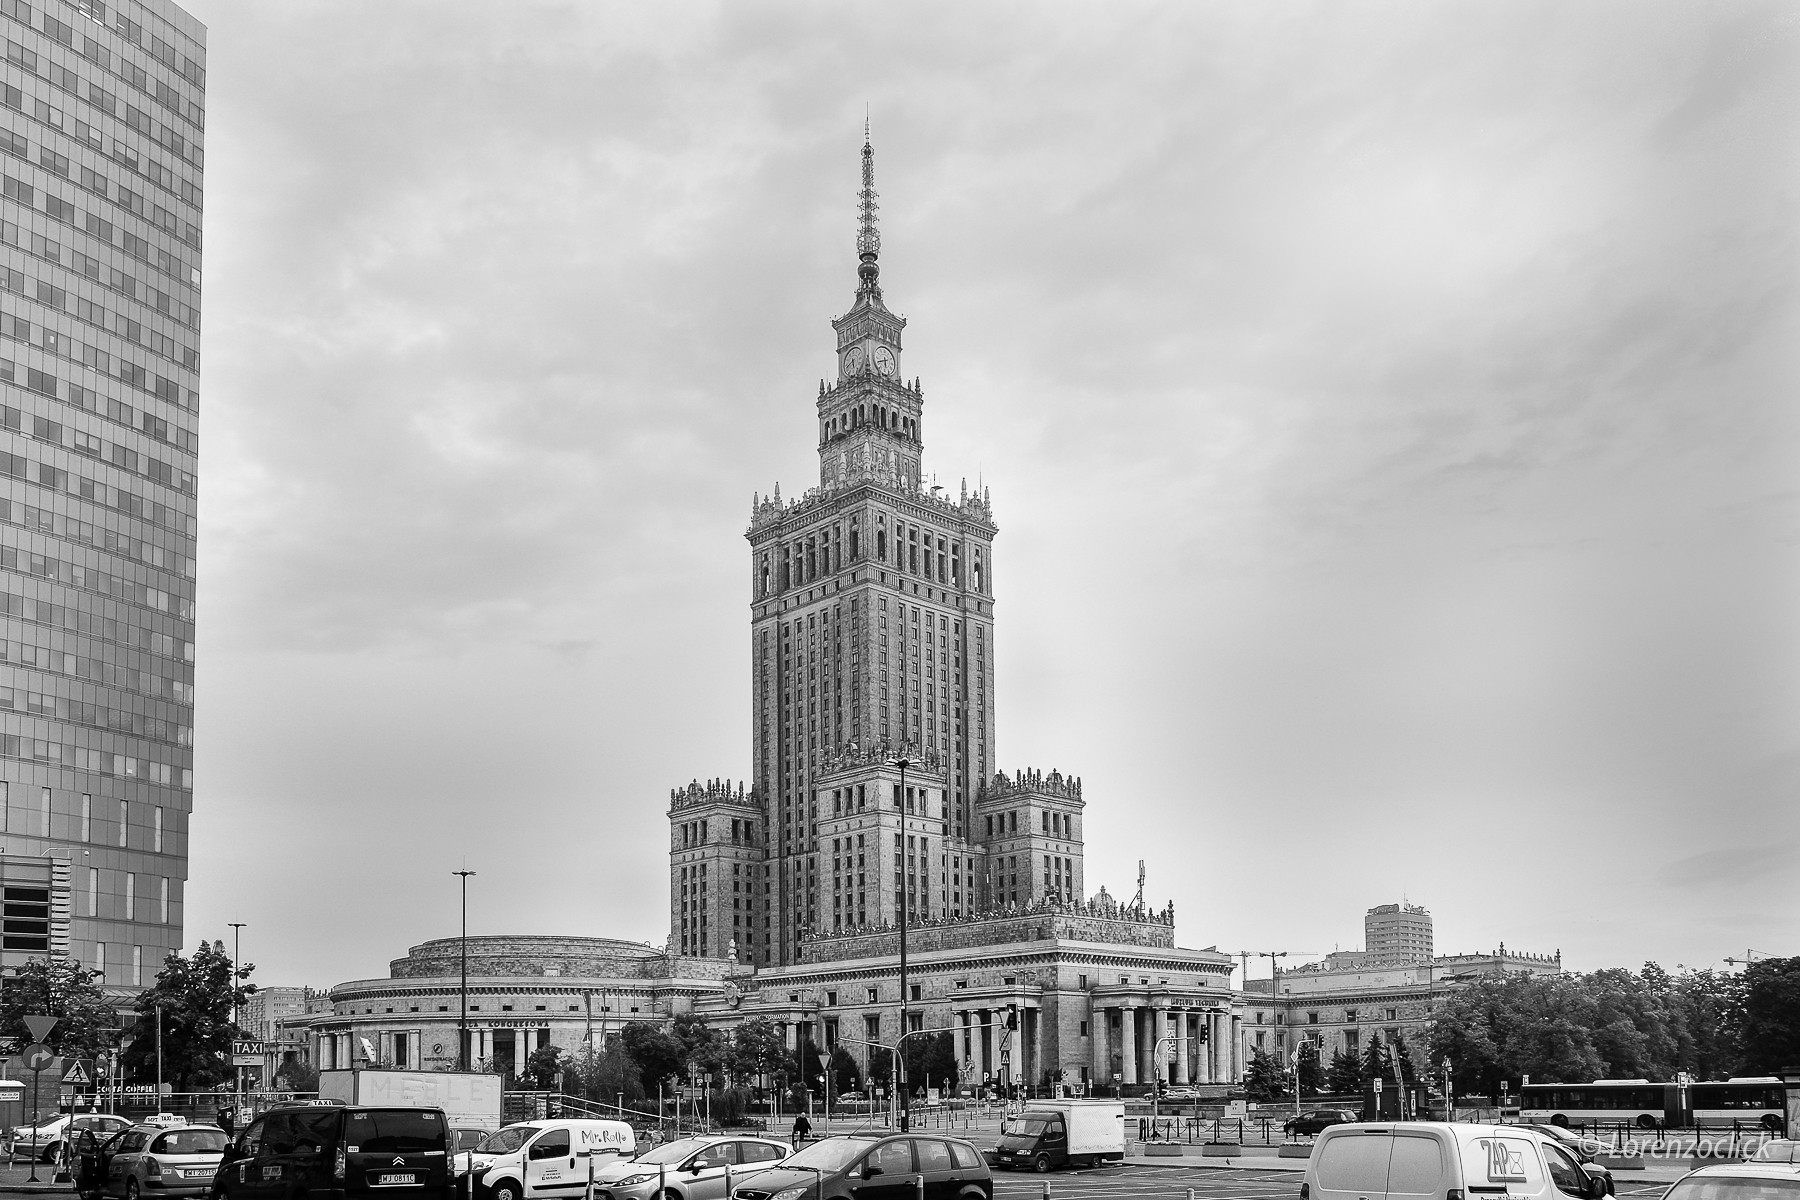 The Palace of Culture and Science in Warsaw, conceived as a "gift of Stalin" and completed in 1955. Source: Lorenzoclick, on Flickr. CC BY-NC 2.0.